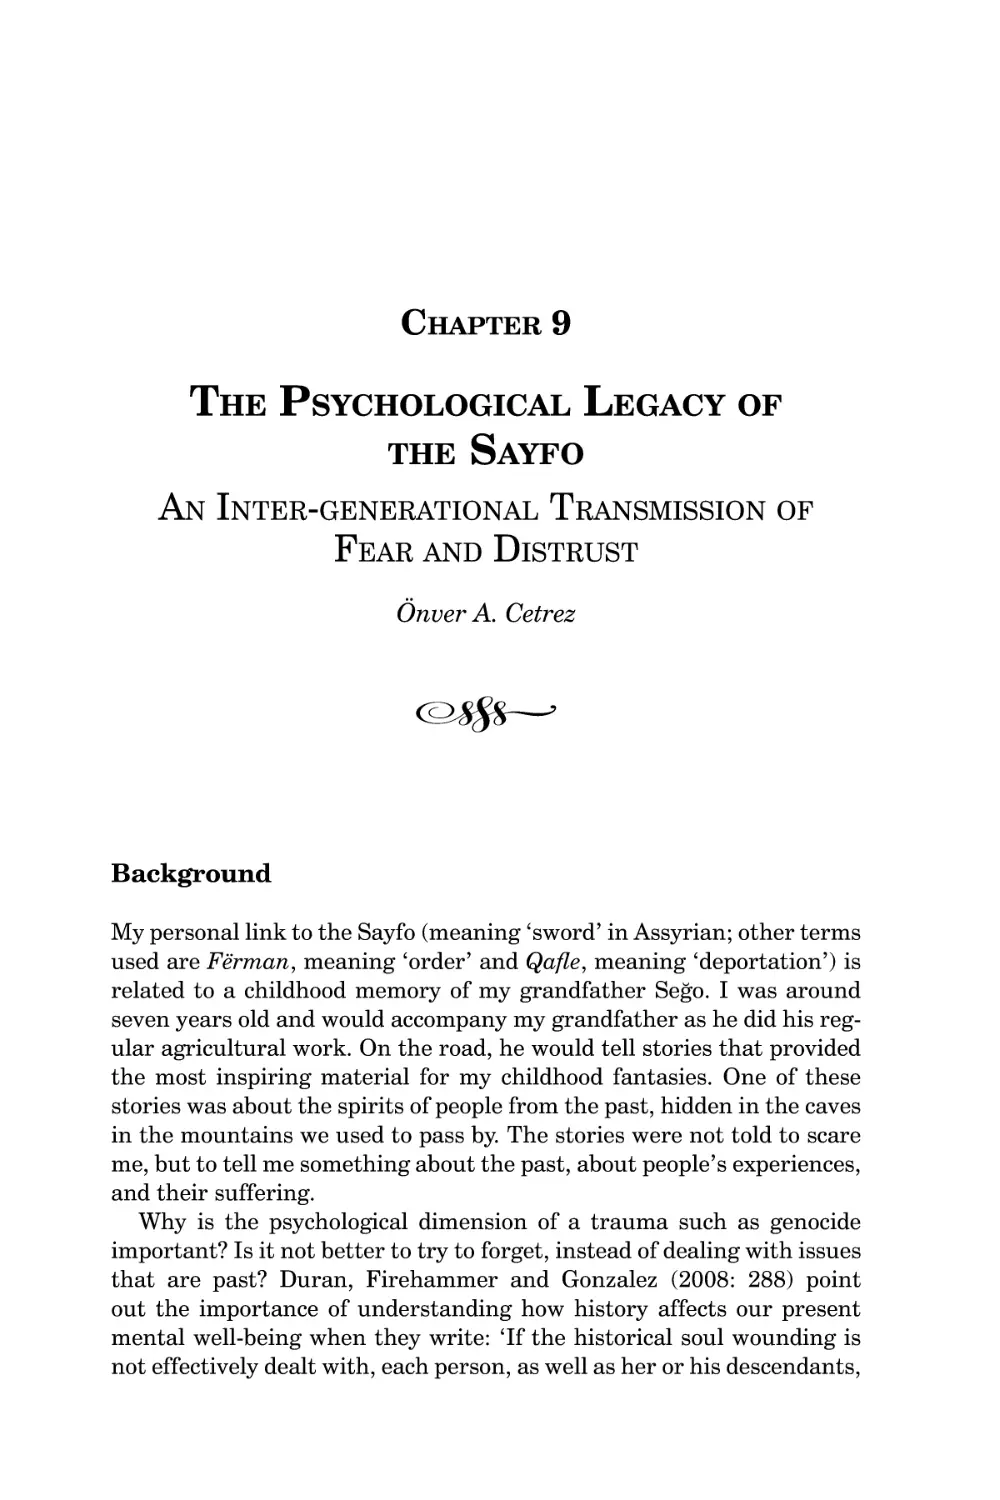 Chapter 9 The Psychological Legacy of the Sayfo